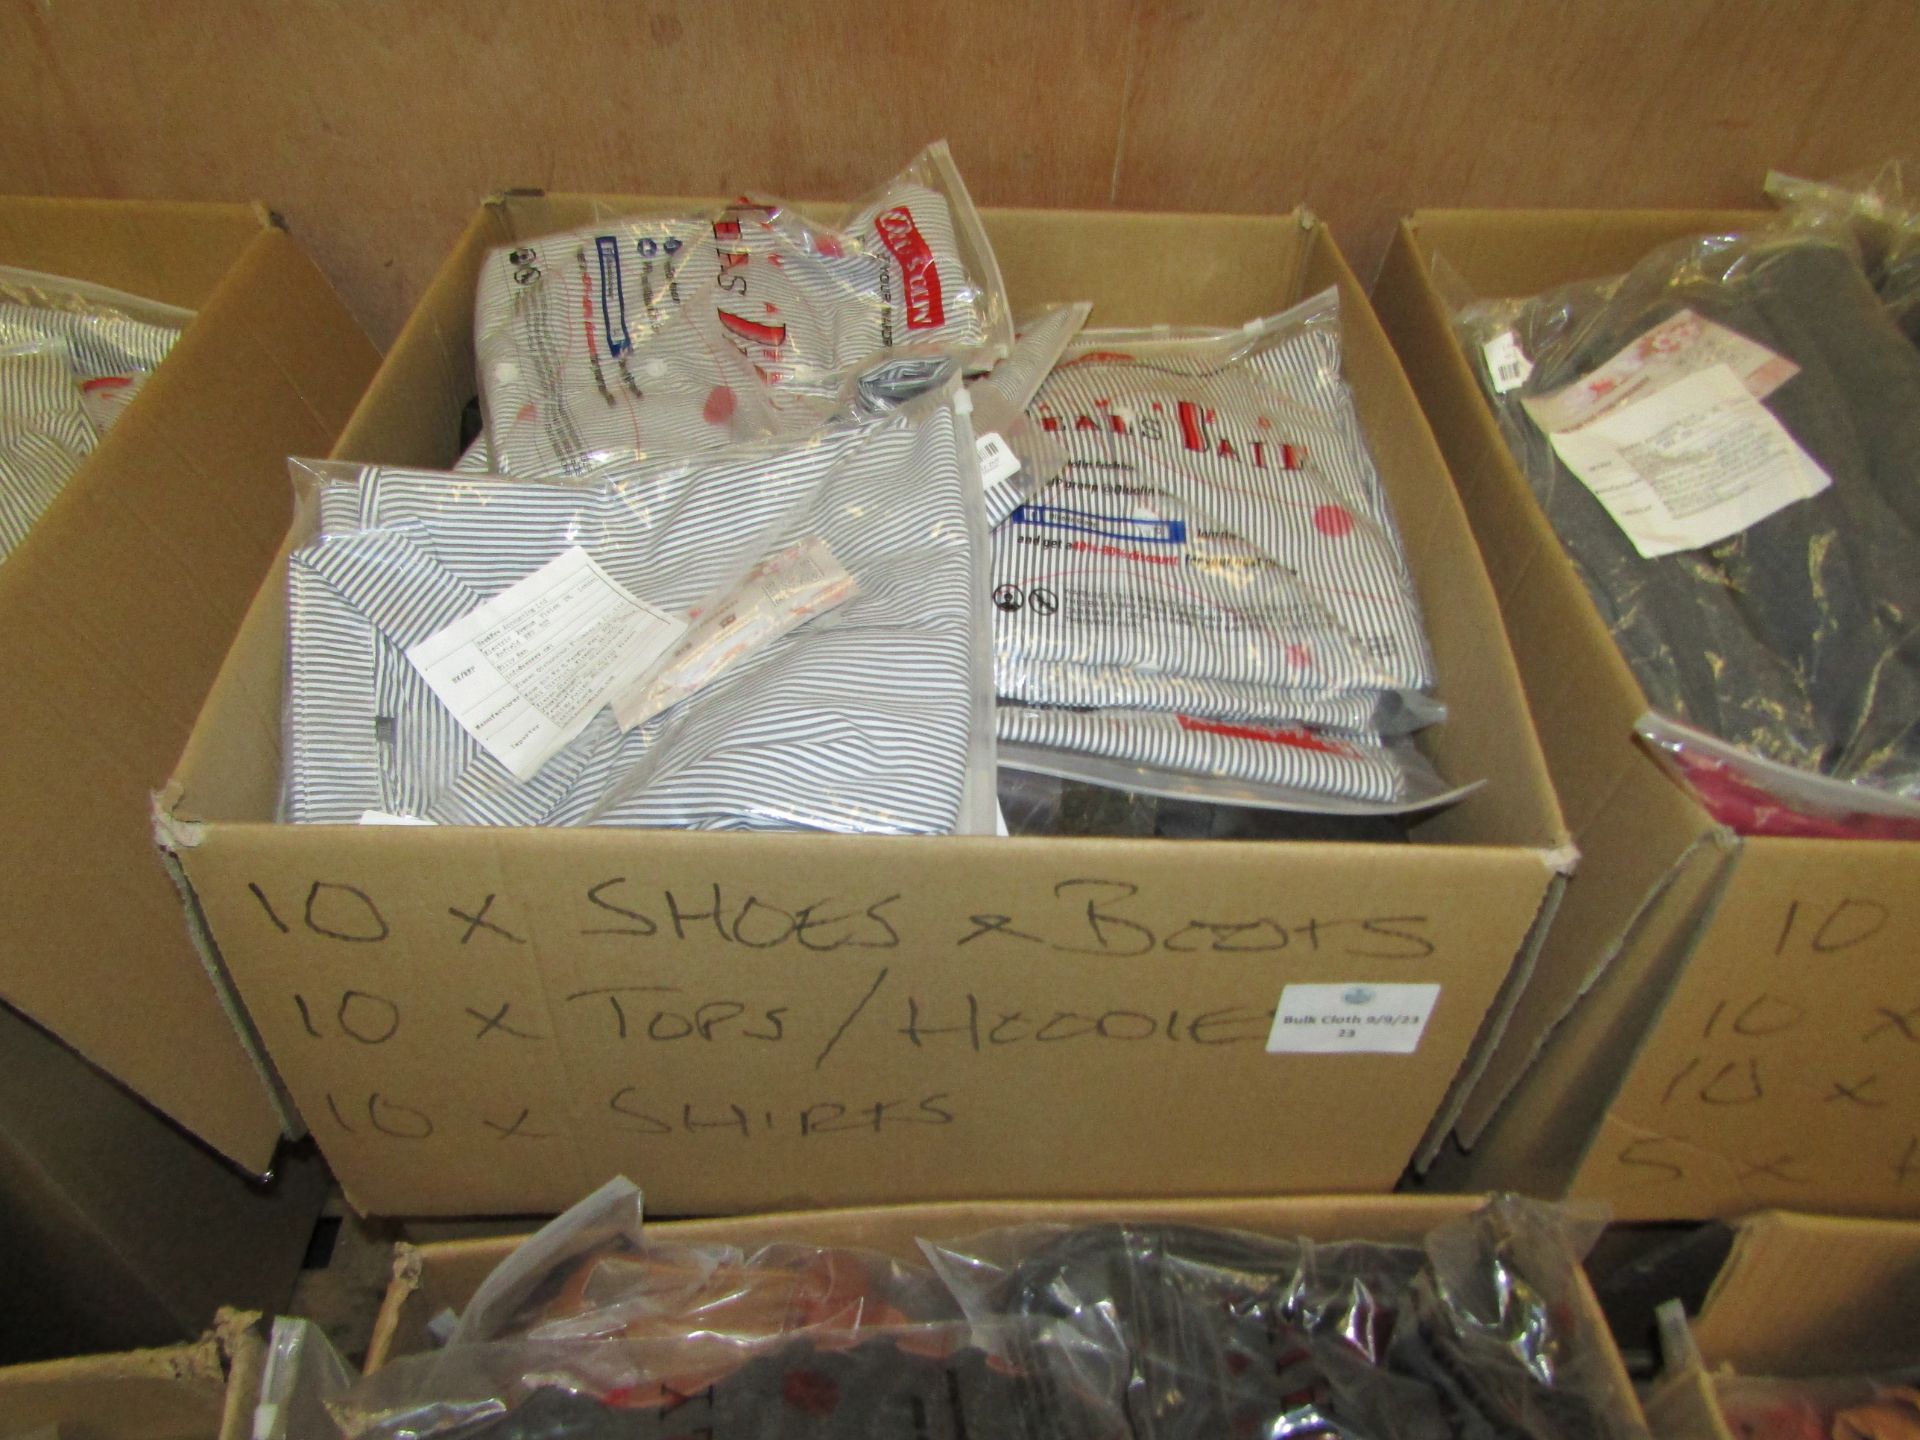 box of Mixed Amazon Shoes and and Clothing all new, consists of 10 shoes/boots and 20 pieces of